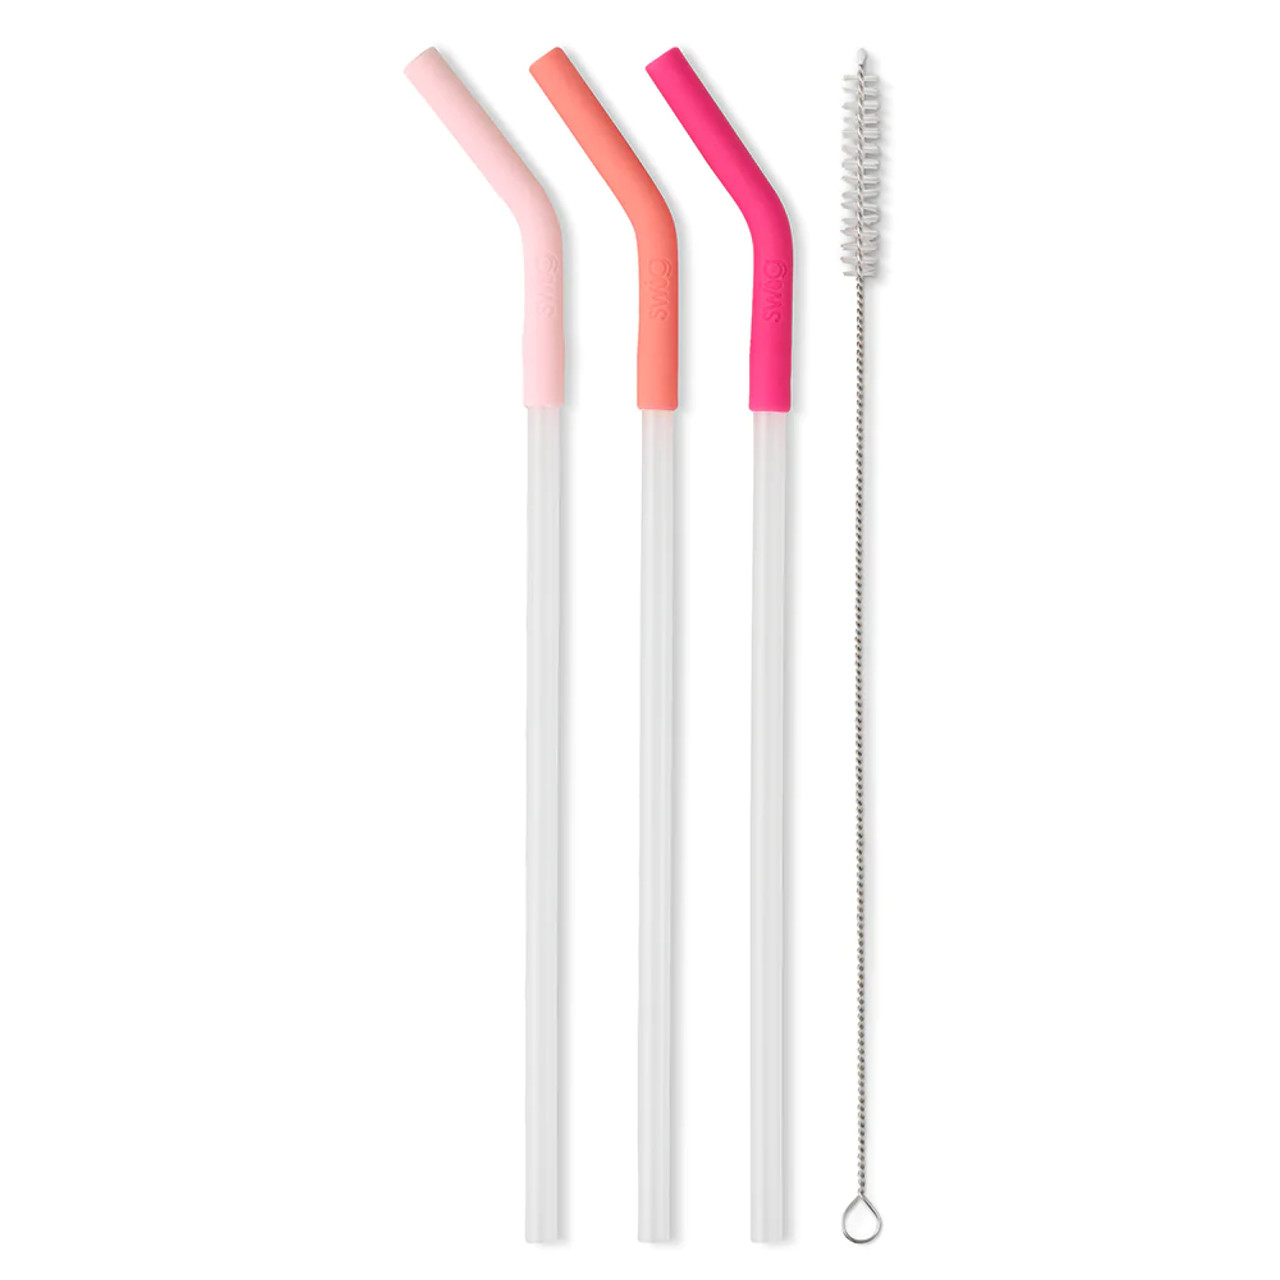 https://cdn11.bigcommerce.com/s-u13xztxgtc/images/stencil/1280x1280/products/21926/35563/swig-life-signature-mega-mug-reusable-straw-set-pink-blush-coral-hot-pink-with-cleaning-brush__74154.1697204462.jpg?c=1